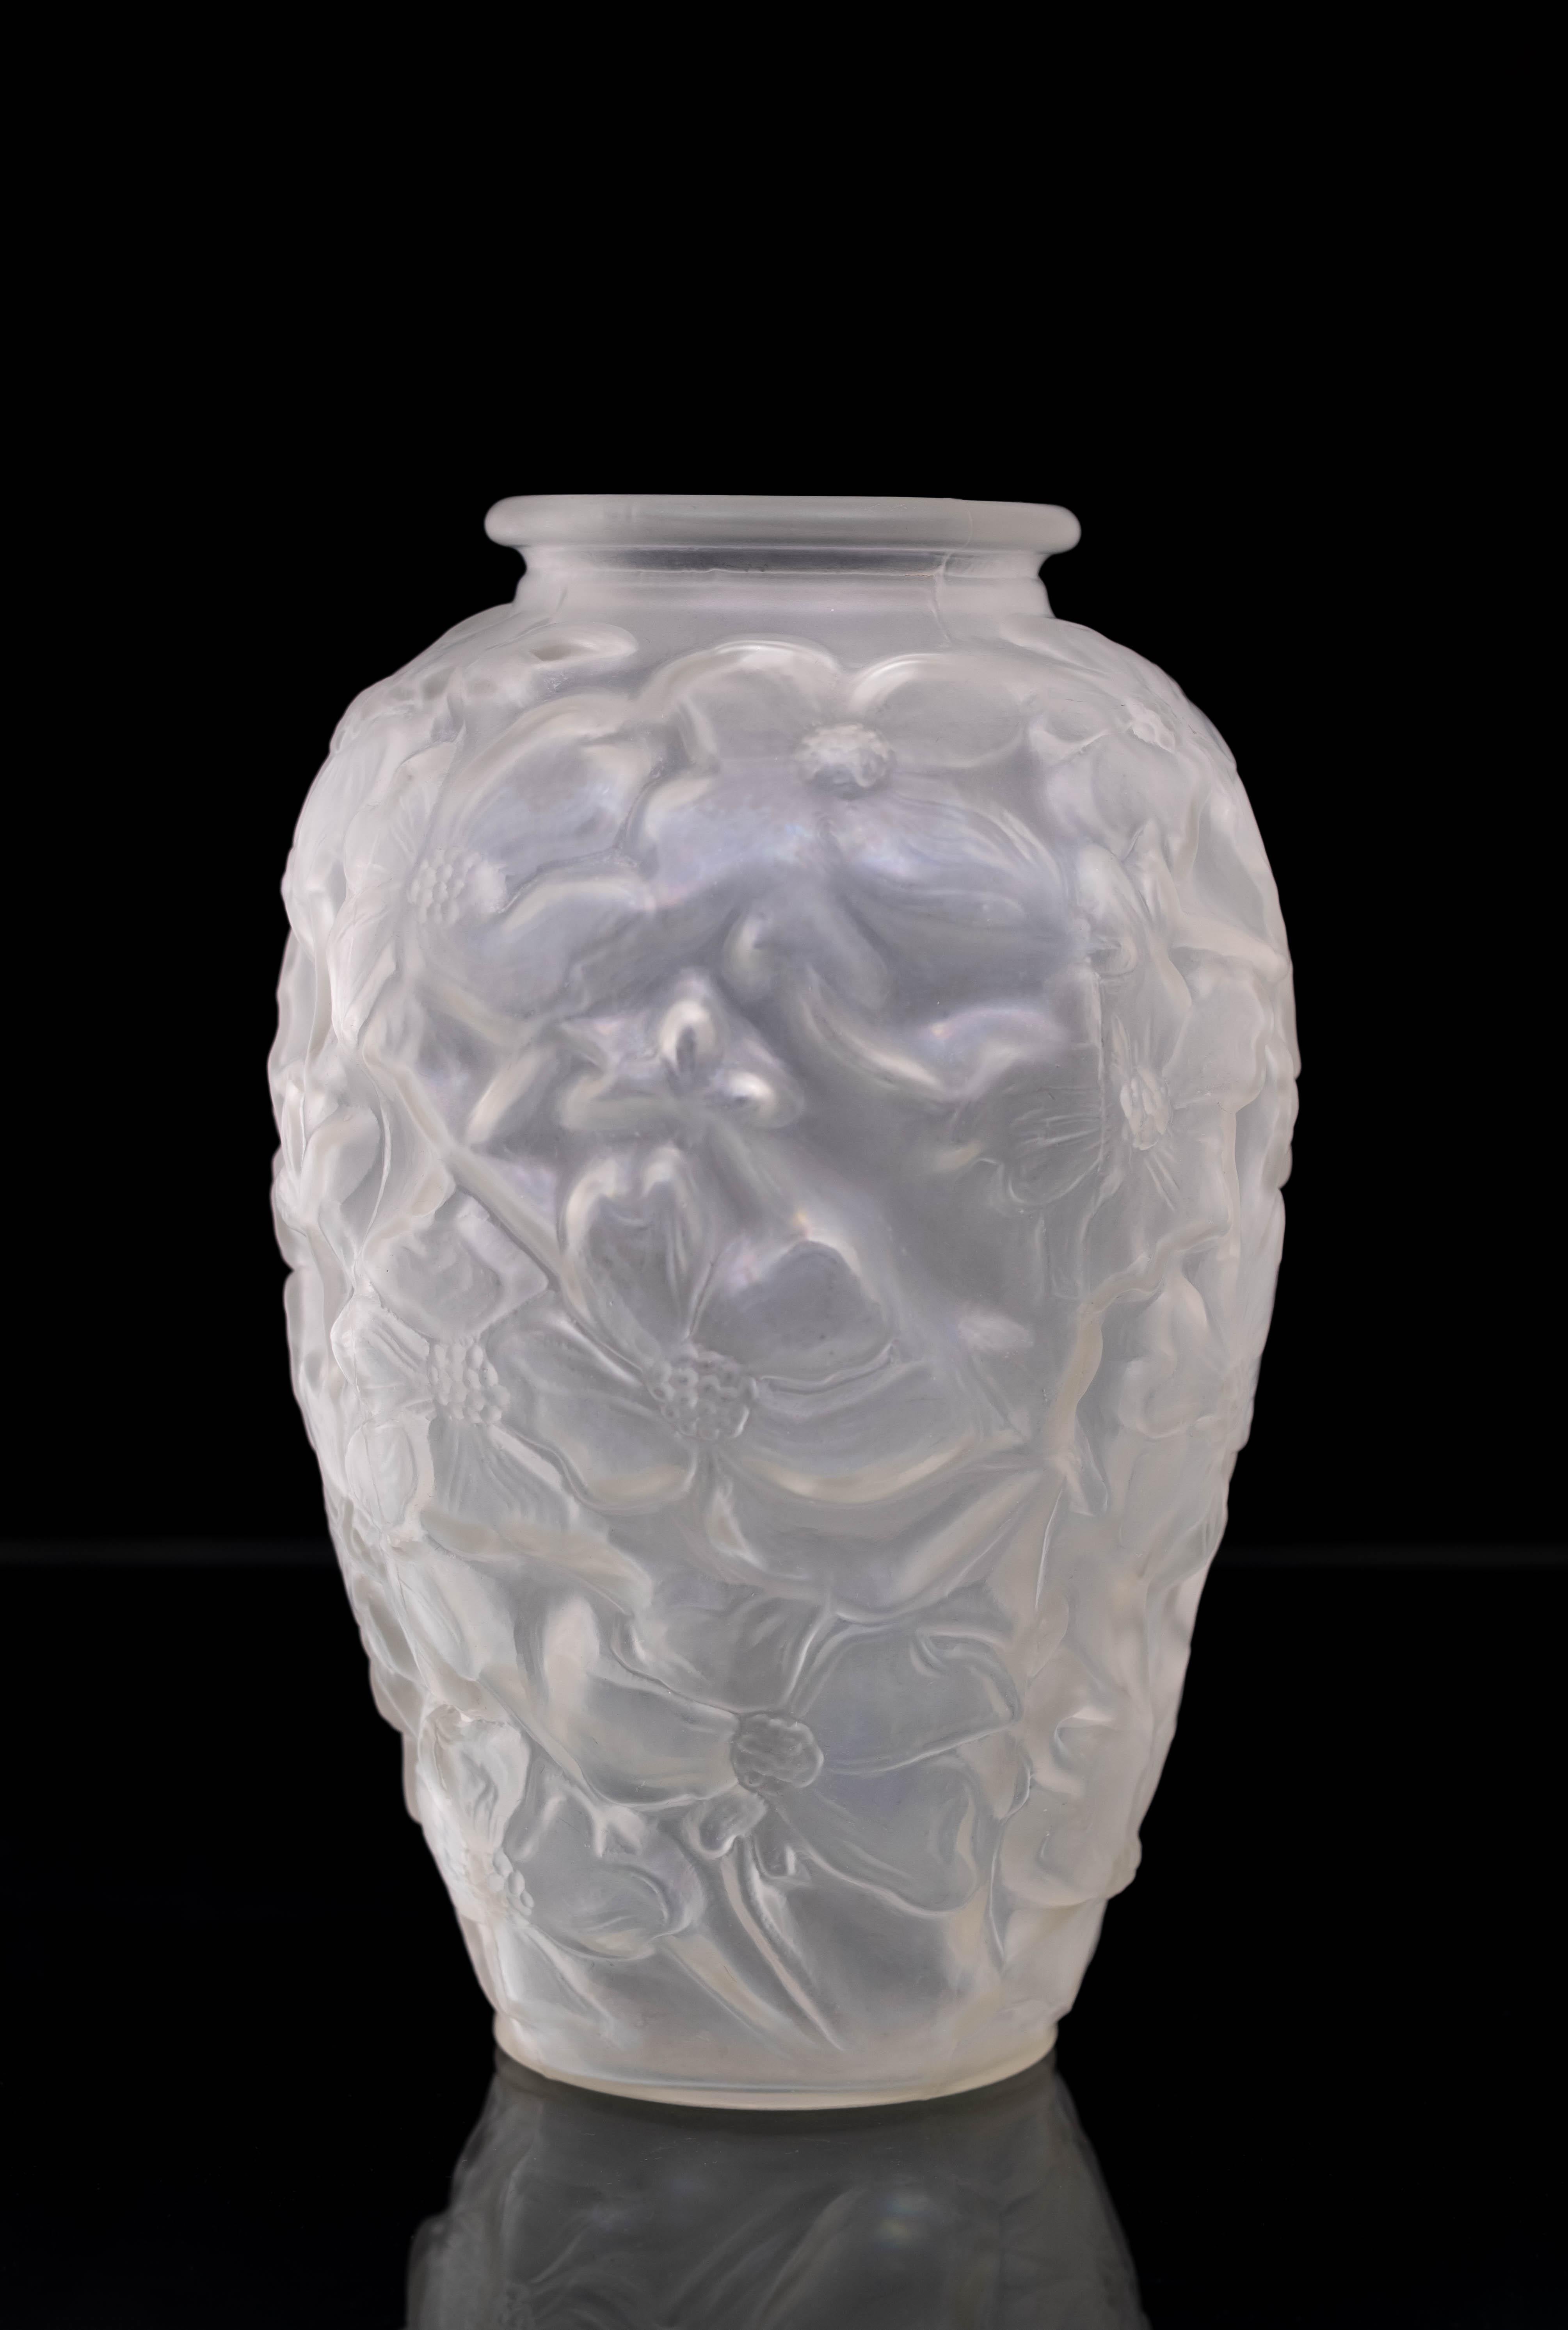 Design Josef Inwald, Barolac, Feigl & Morawetz. Made in Czech Republic, 1930s 
- Very nice frosted & polished vase with flowers.



  